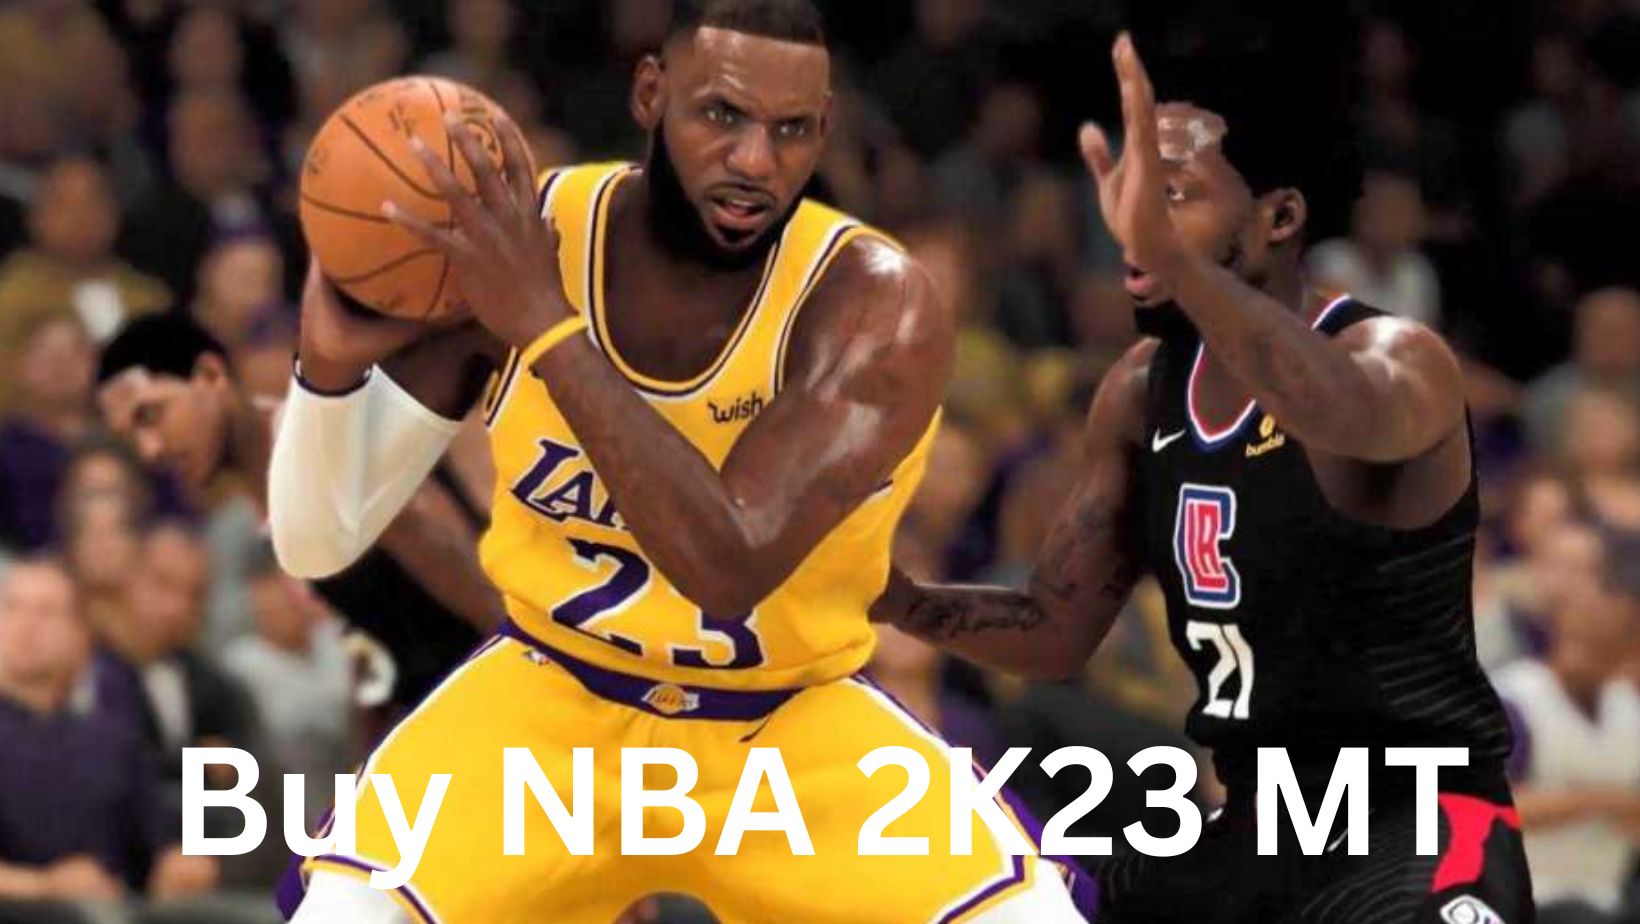 NBA 2K23 MT - What Is It and Why Is It Important?